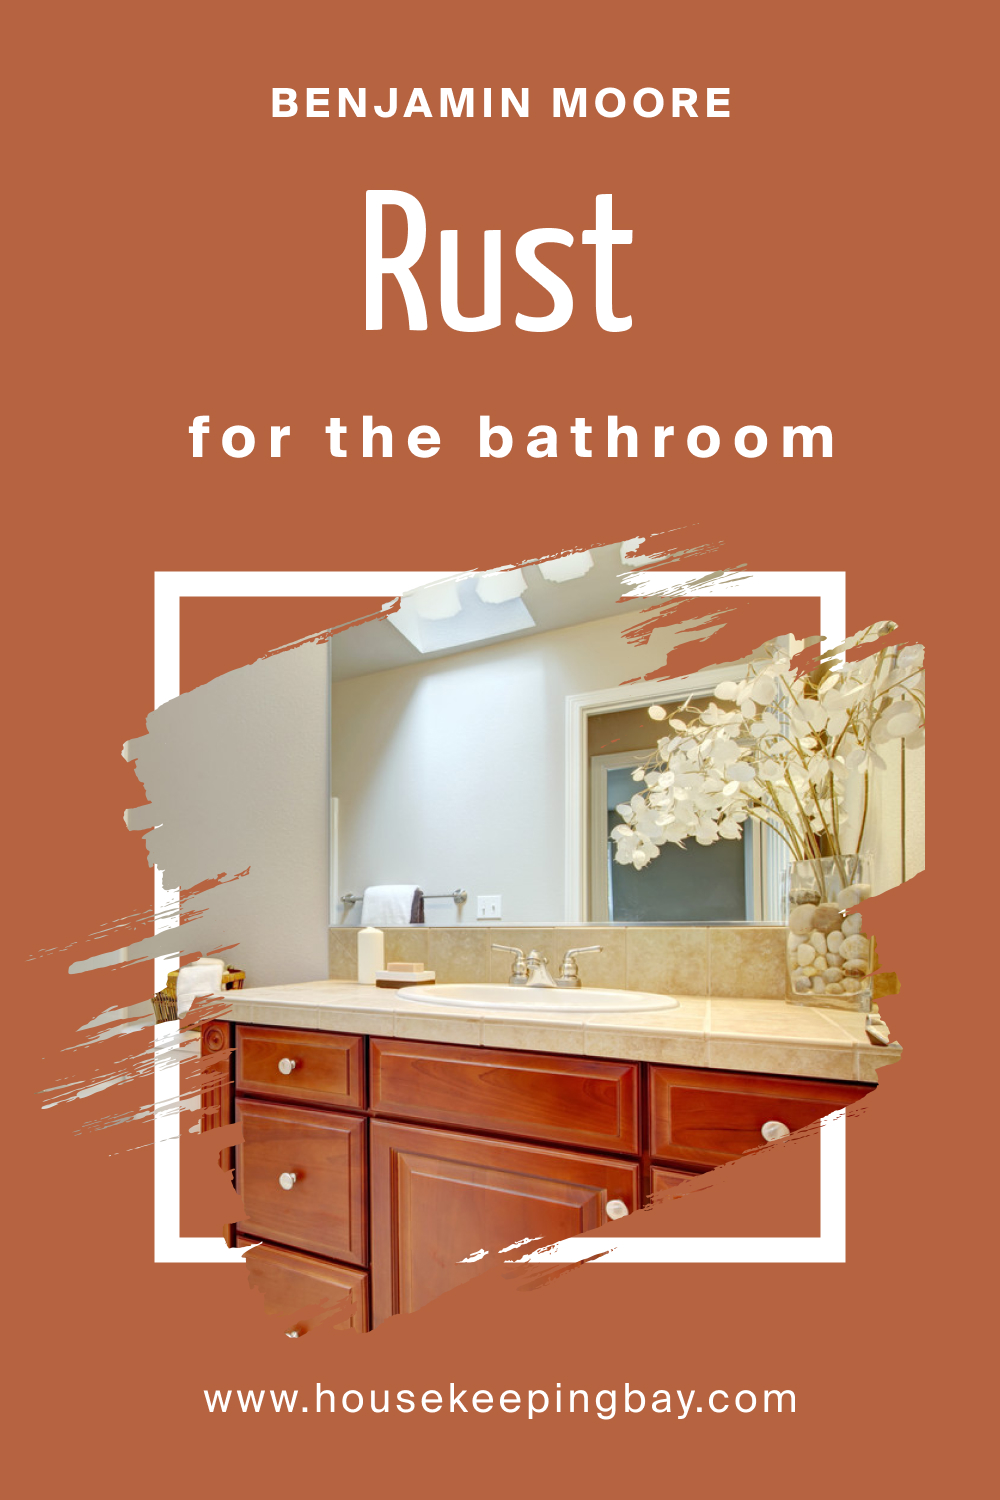 How to Use BM Rust 2175-30 in the Bathroom?